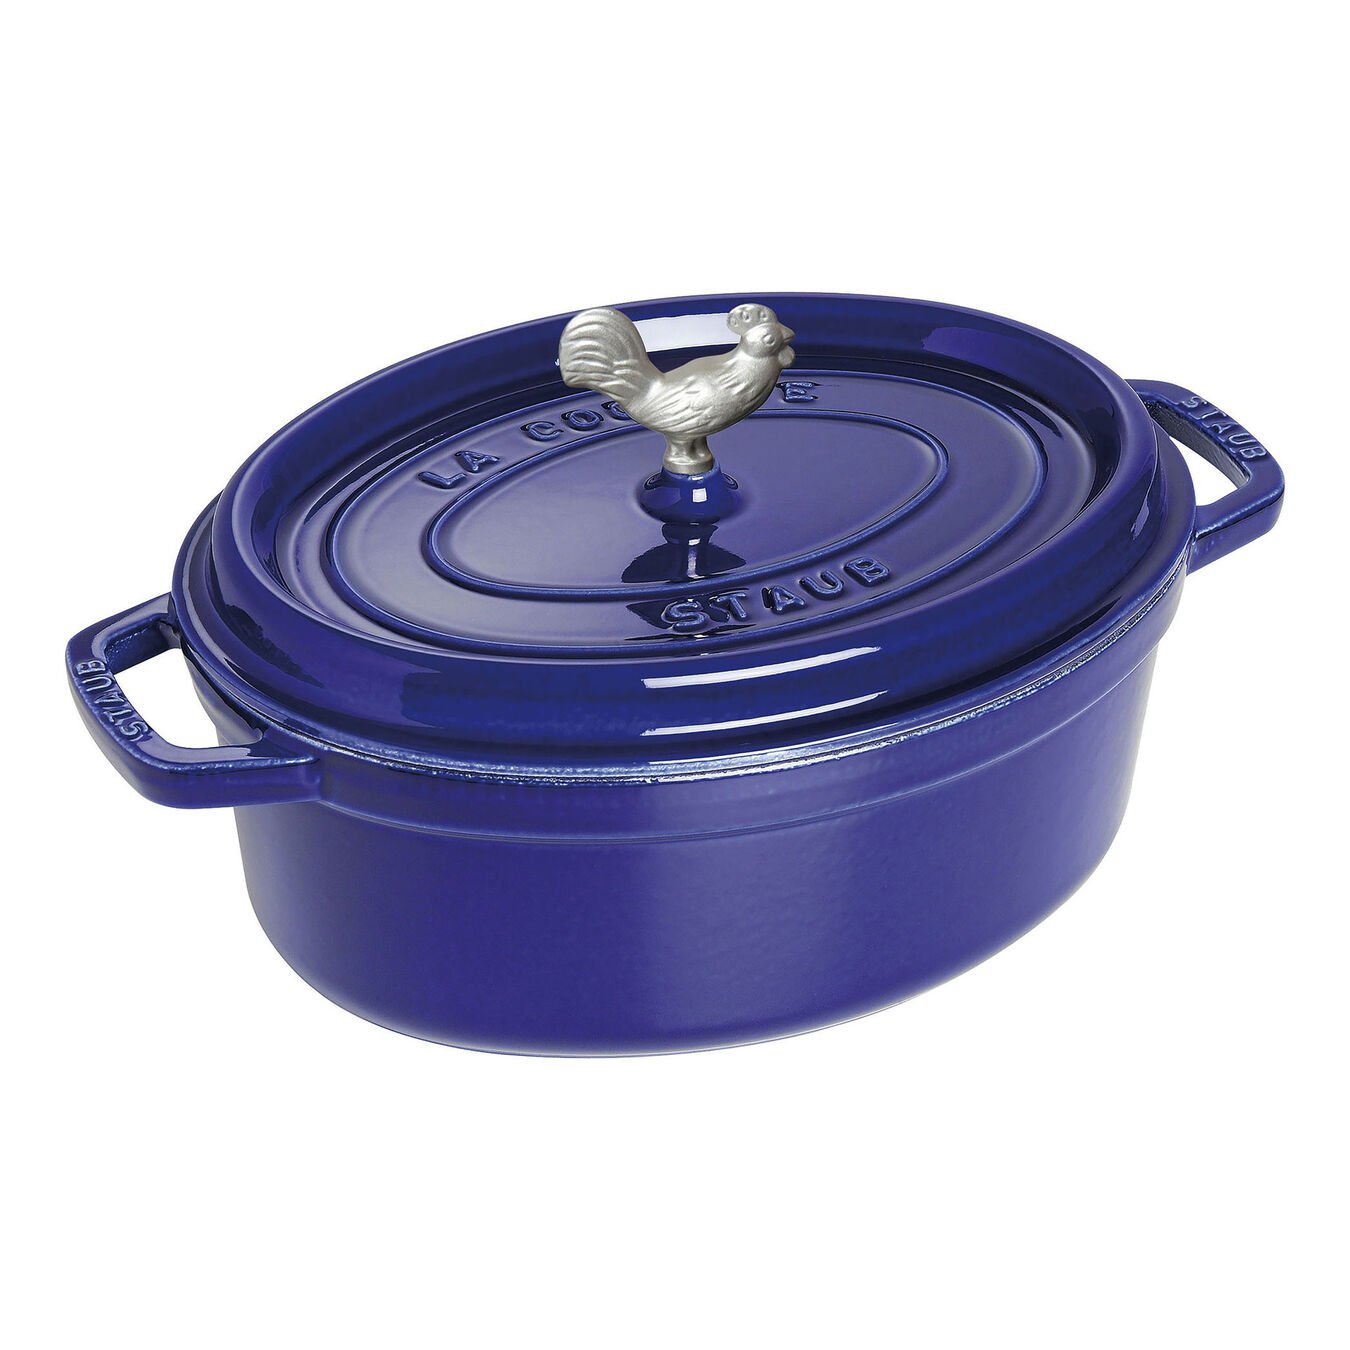 Staub Petite French Oven - 1.5-qt Cast Iron - Matte Black – Cutlery and More